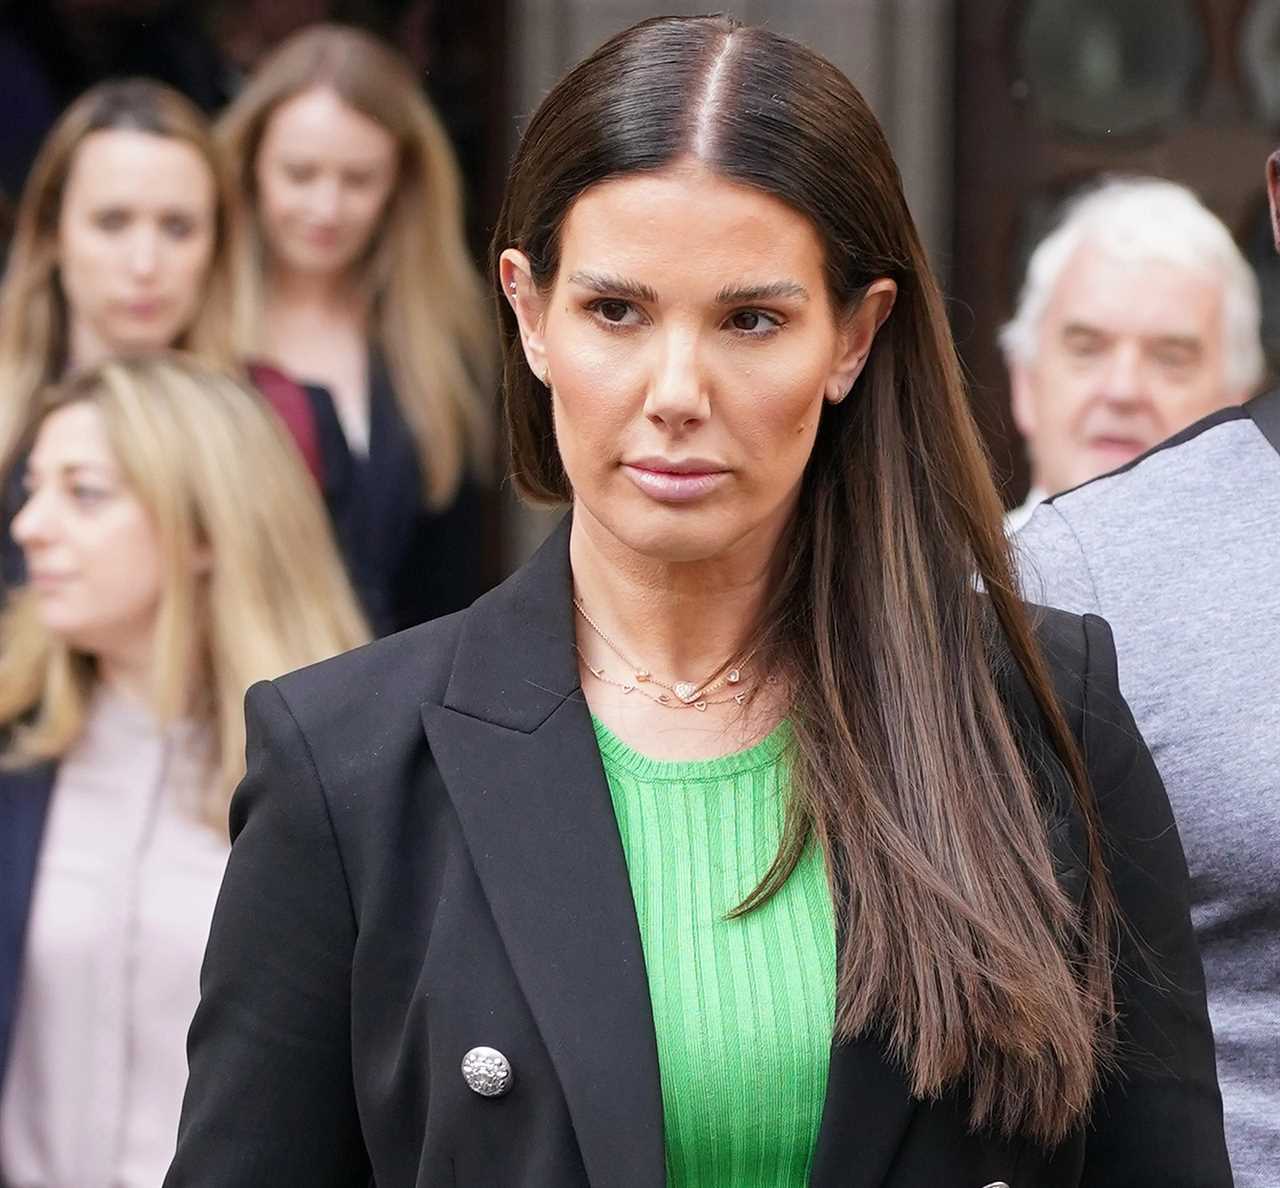 Brave Rebekah Vardy reveals she was sexually abused aged 12 – and accuses her Jehovah’s Witness church of a ‘hush-up’